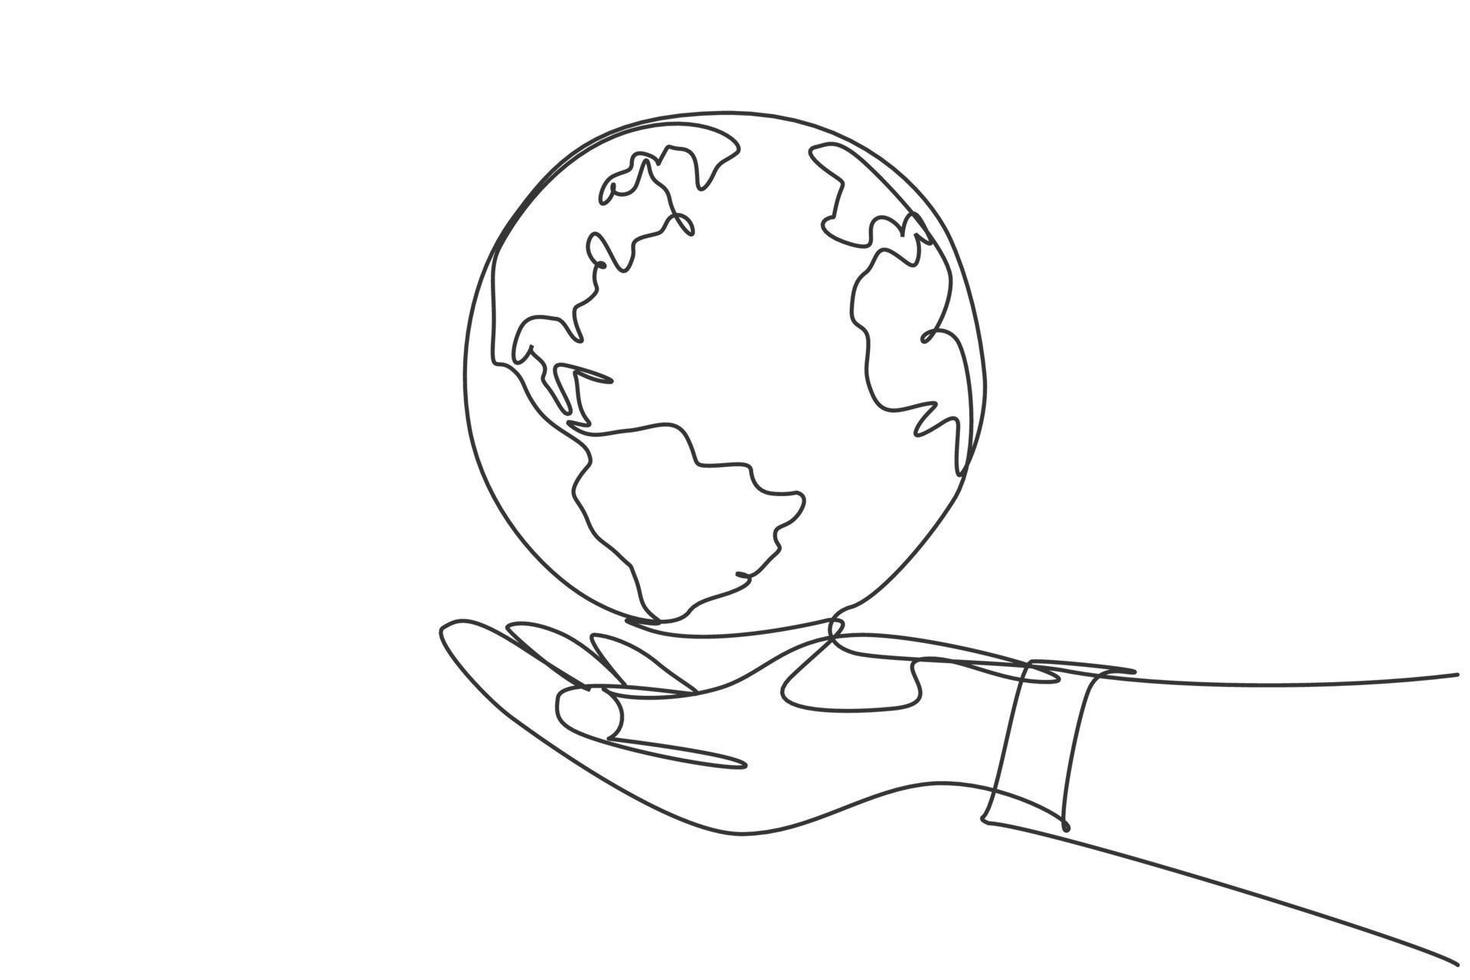 Single one line drawing of hands hold round earth. Globe icon silhouette for world protect concept. Infographics, business presentation isolated on white background. Design vector graphic illustration